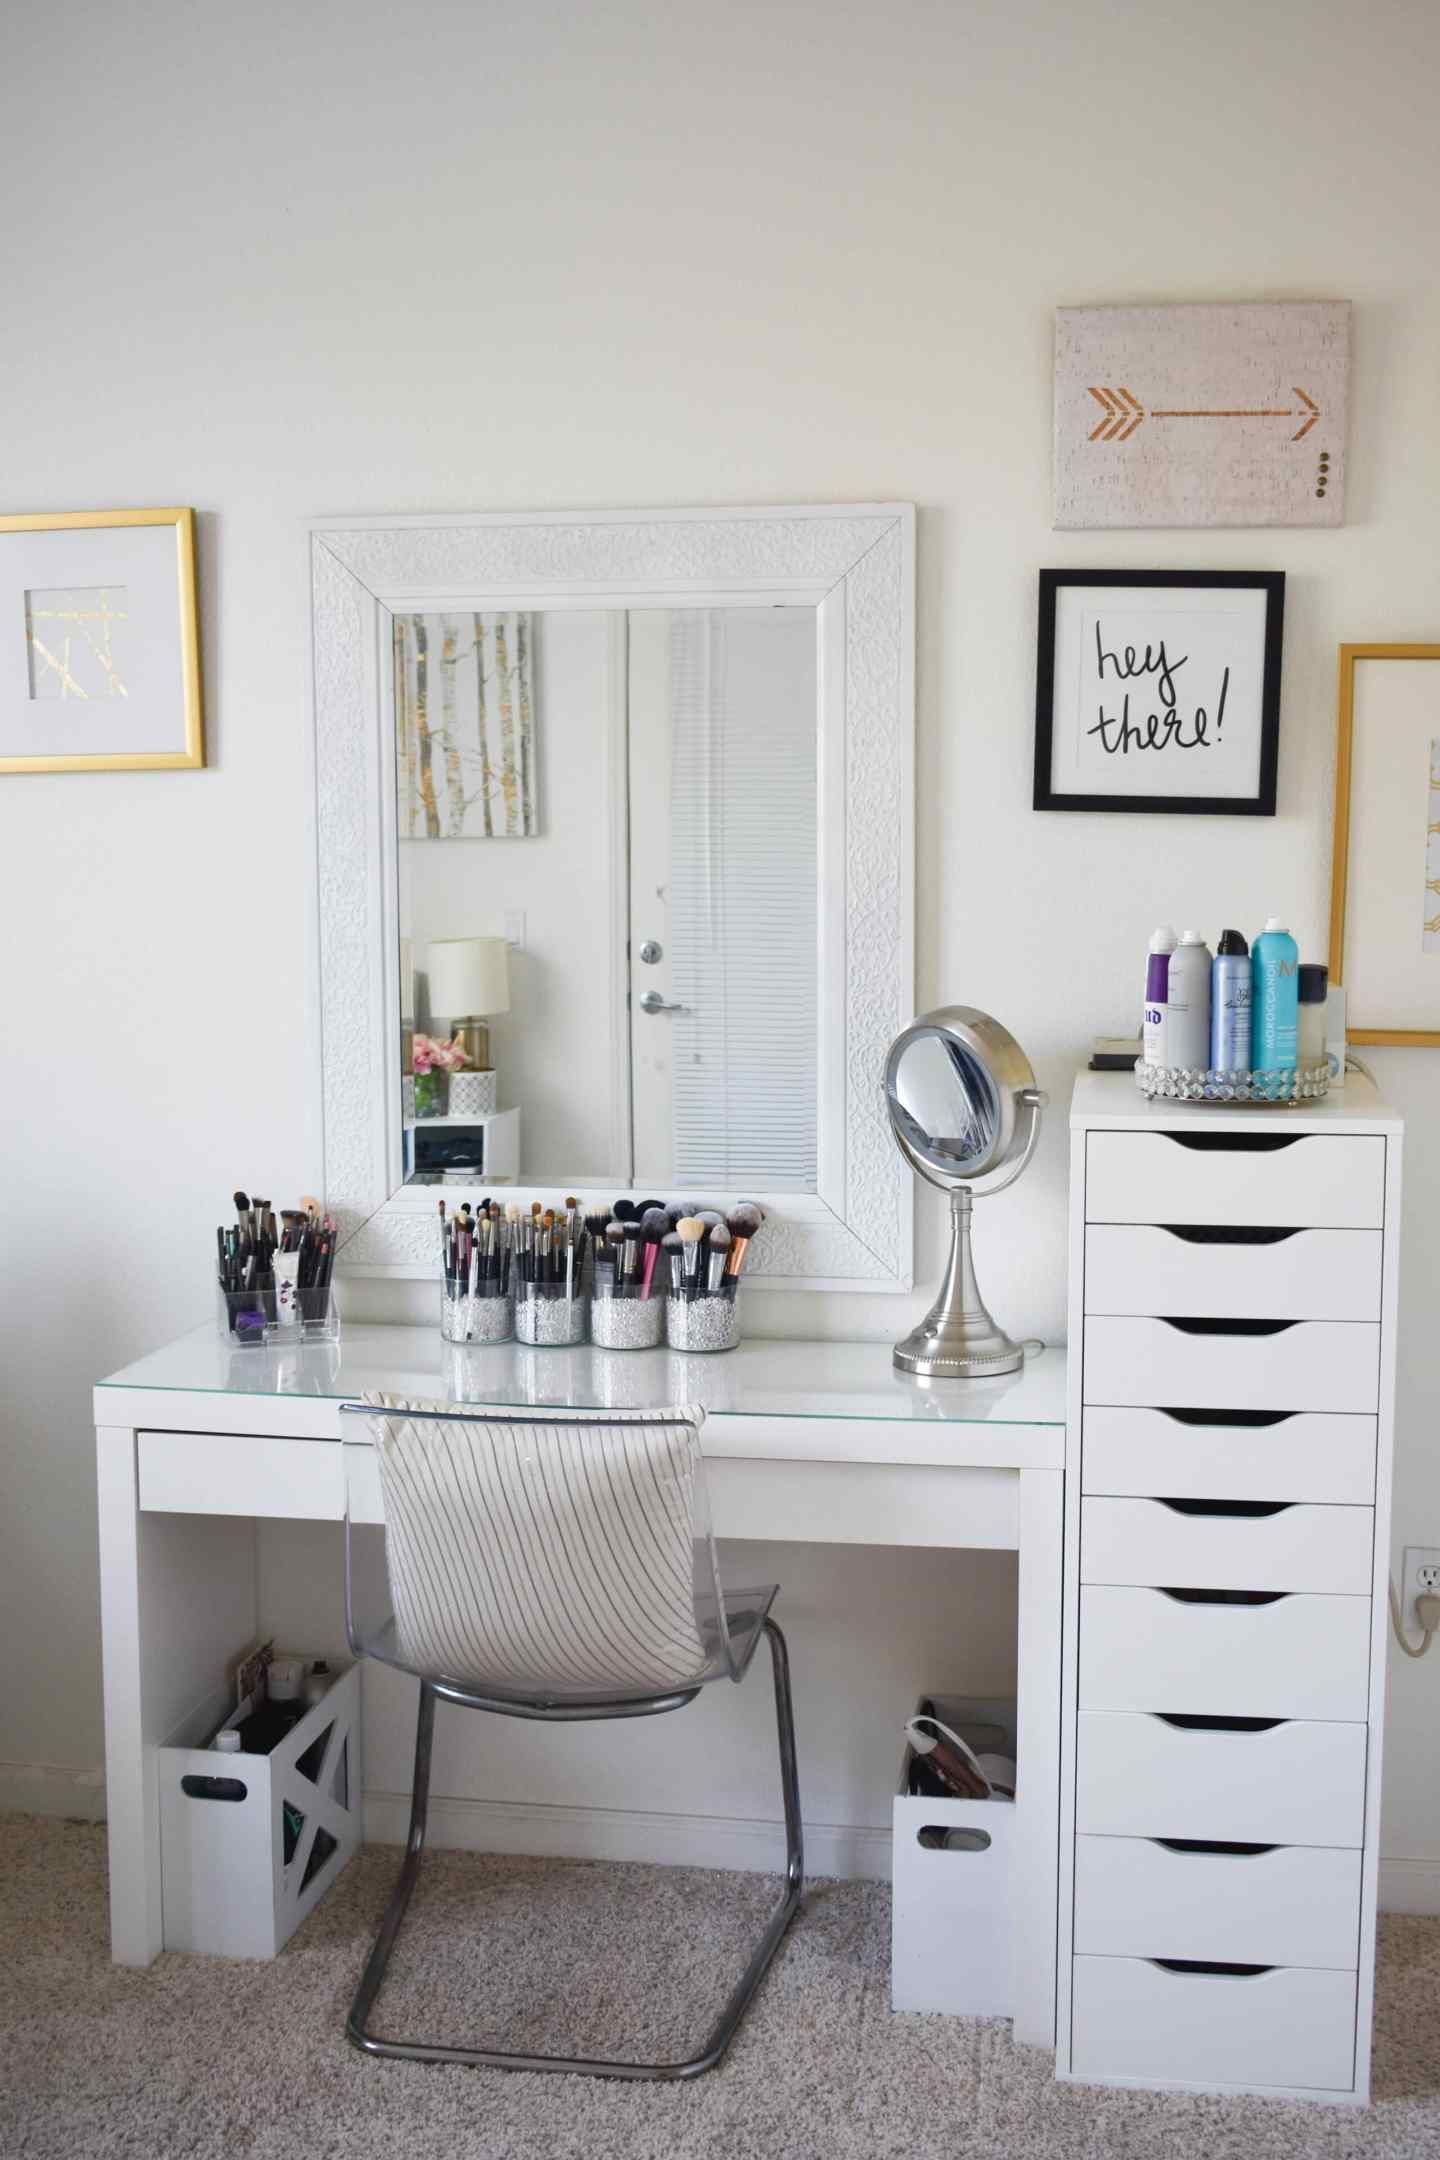 Makeup Storage and Organization: Tips and Ideas - Makeup Storage and Organization: Tips and Ideas -   18 beauty Room storage ideas